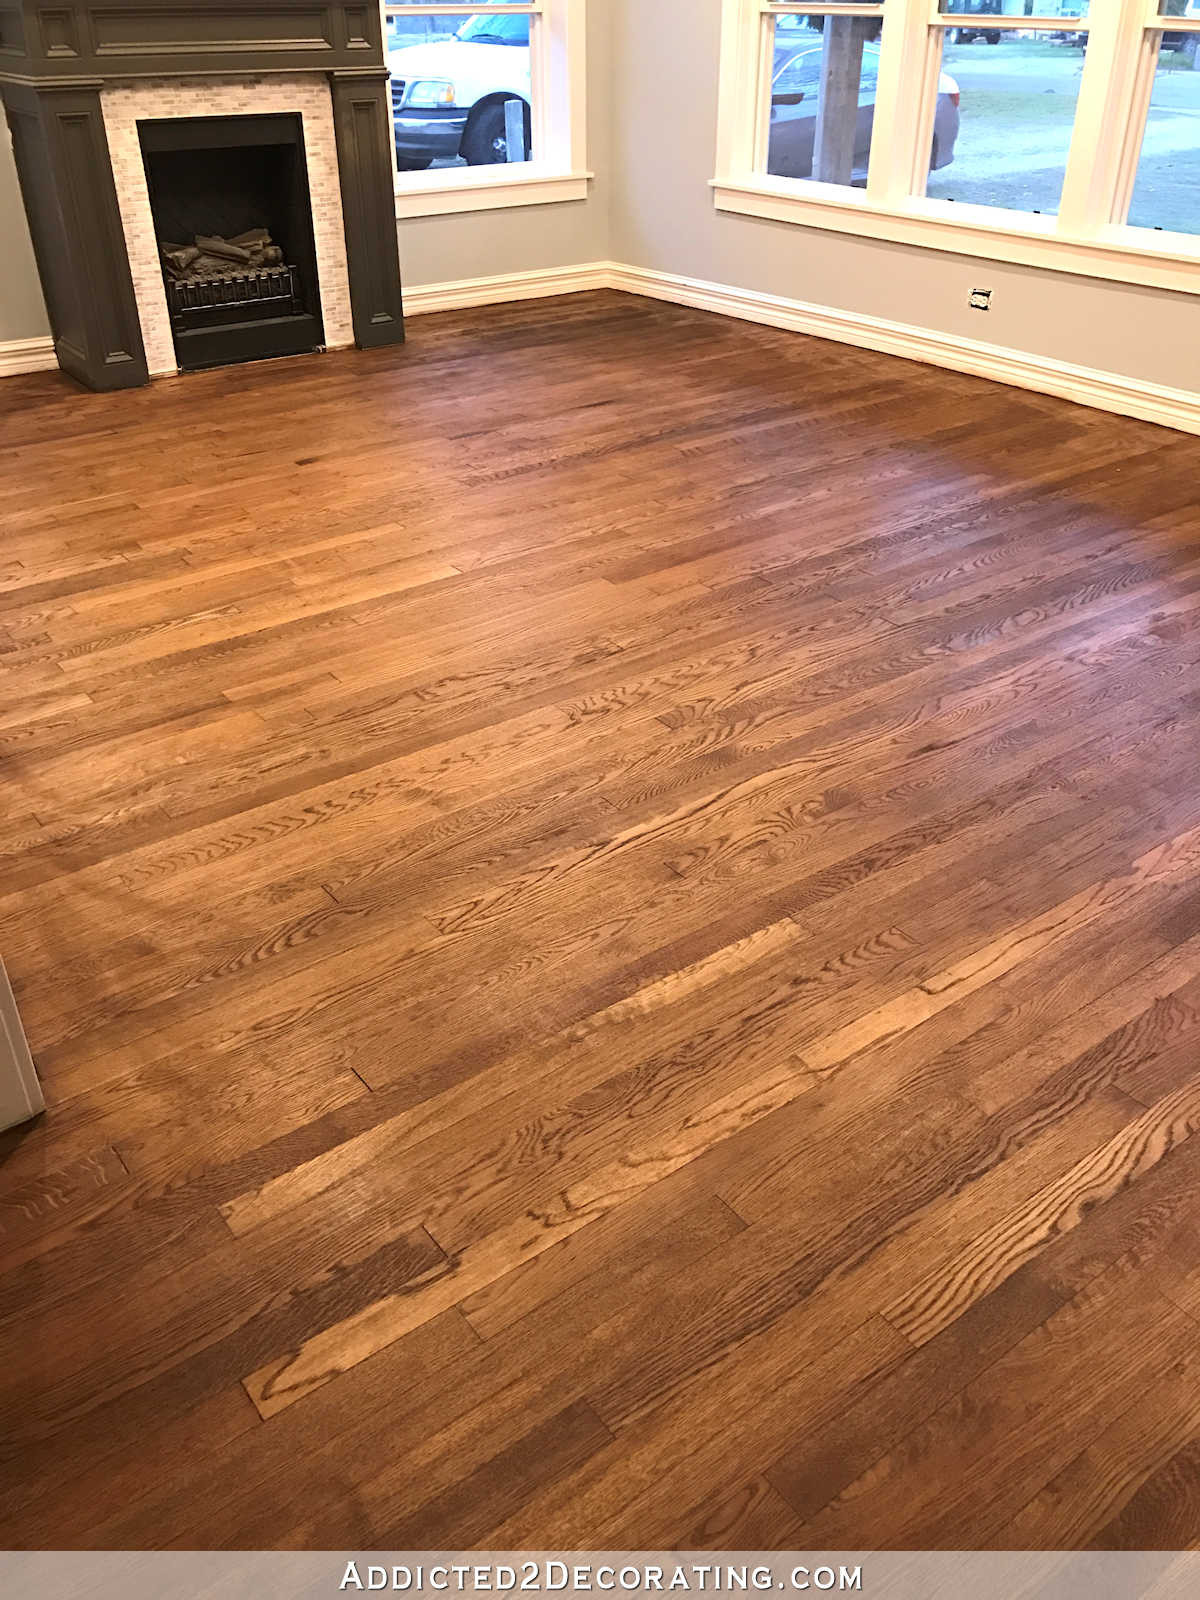 17 Fabulous How Much A Square Foot to Refinish Hardwood Floors 2024 free download how much a square foot to refinish hardwood floors of adventures in staining my red oak hardwood floors products process intended for staining red oak hardwood floors 8a living room and entr